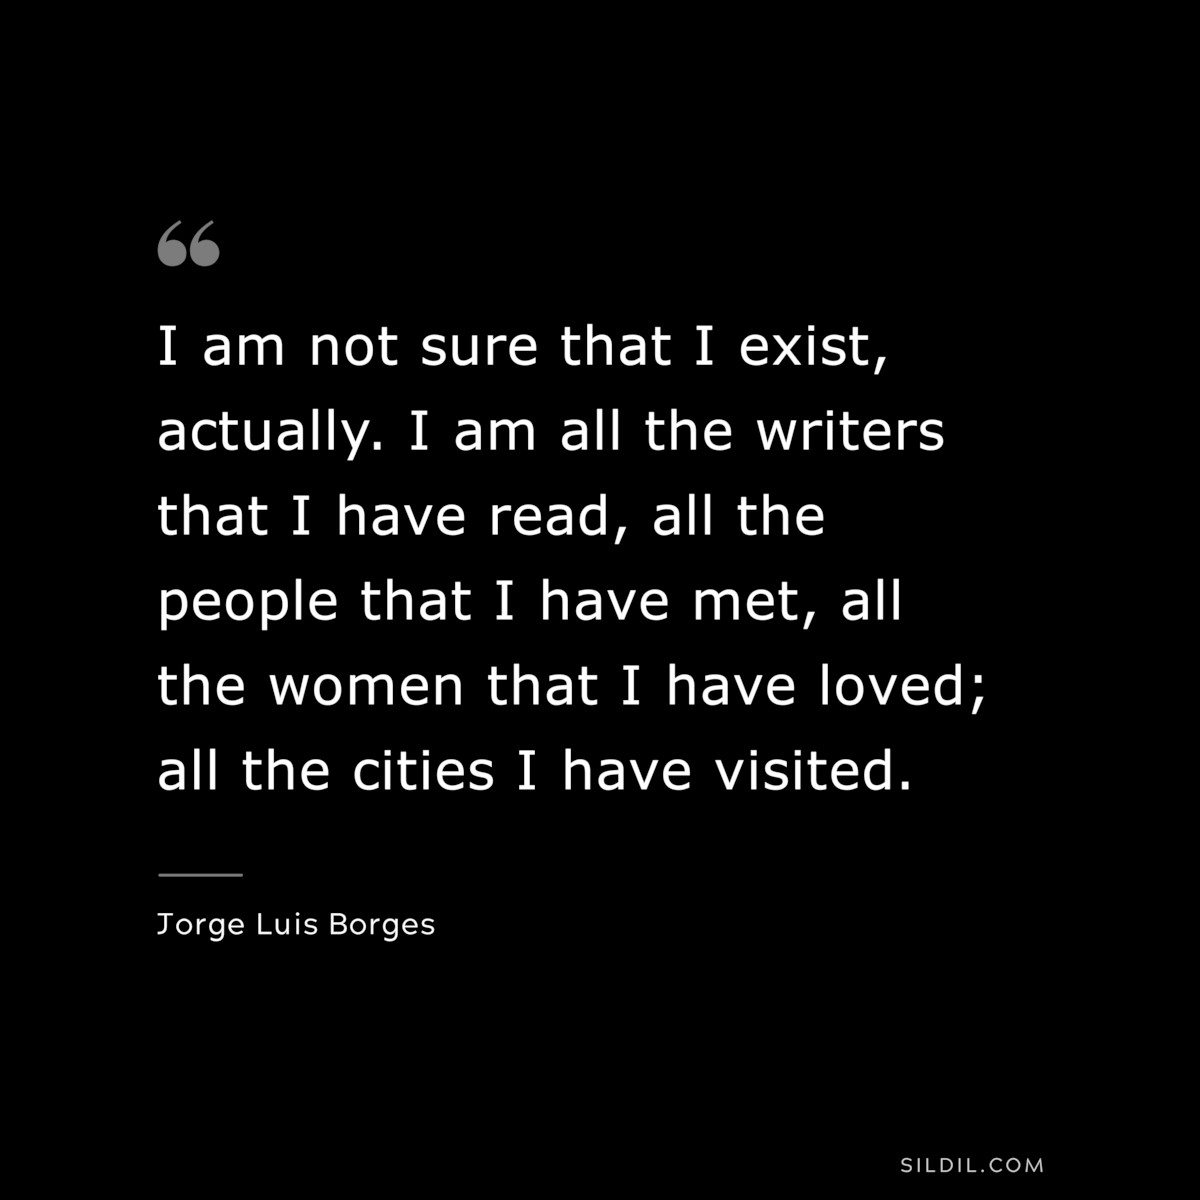 I am not sure that I exist, actually. I am all the writers that I have read, all the people that I have met, all the women that I have loved; all the cities I have visited. ― Jorge Luis Borges